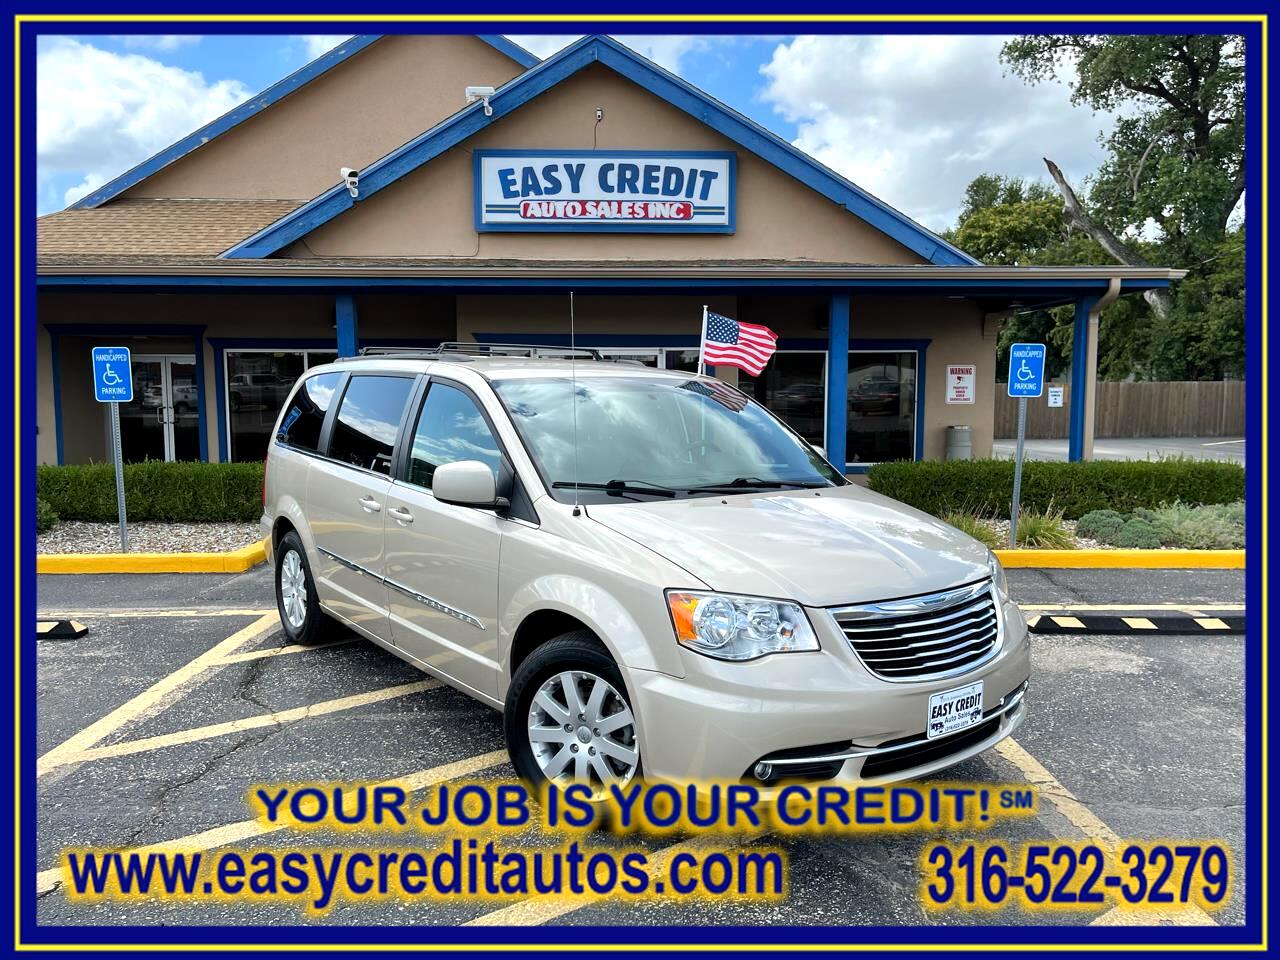 Chrysler Town & Country 4dr Wgn Touring 2015